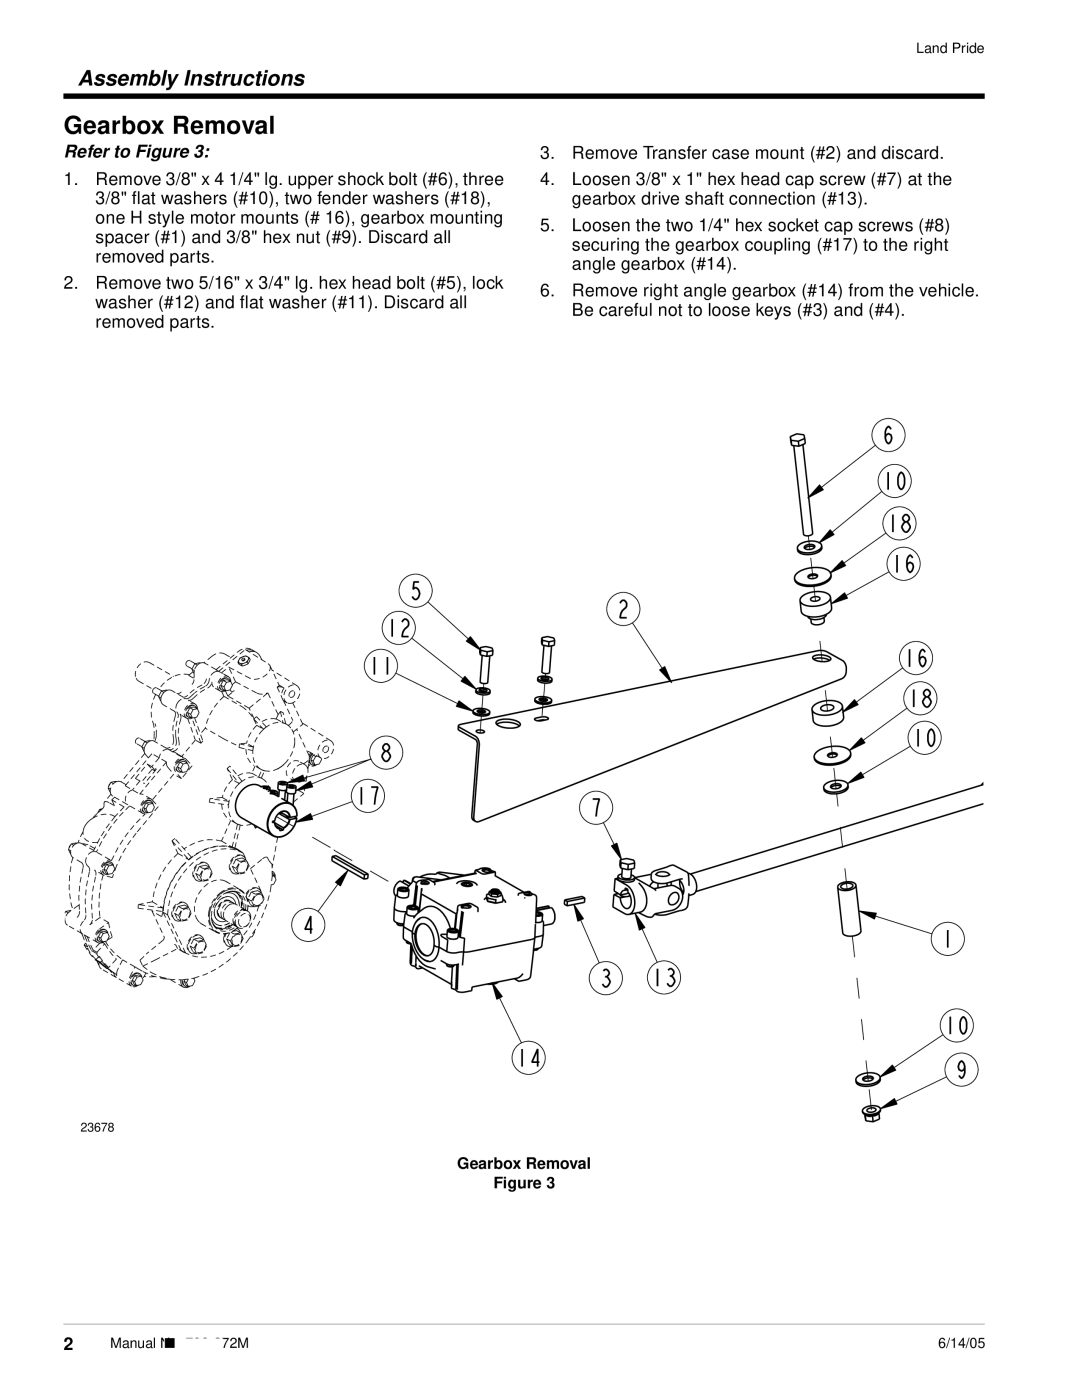 Land Pride 4400NT installation instructions Gearbox Removal, Assembly Instructions, Refer to Figure 